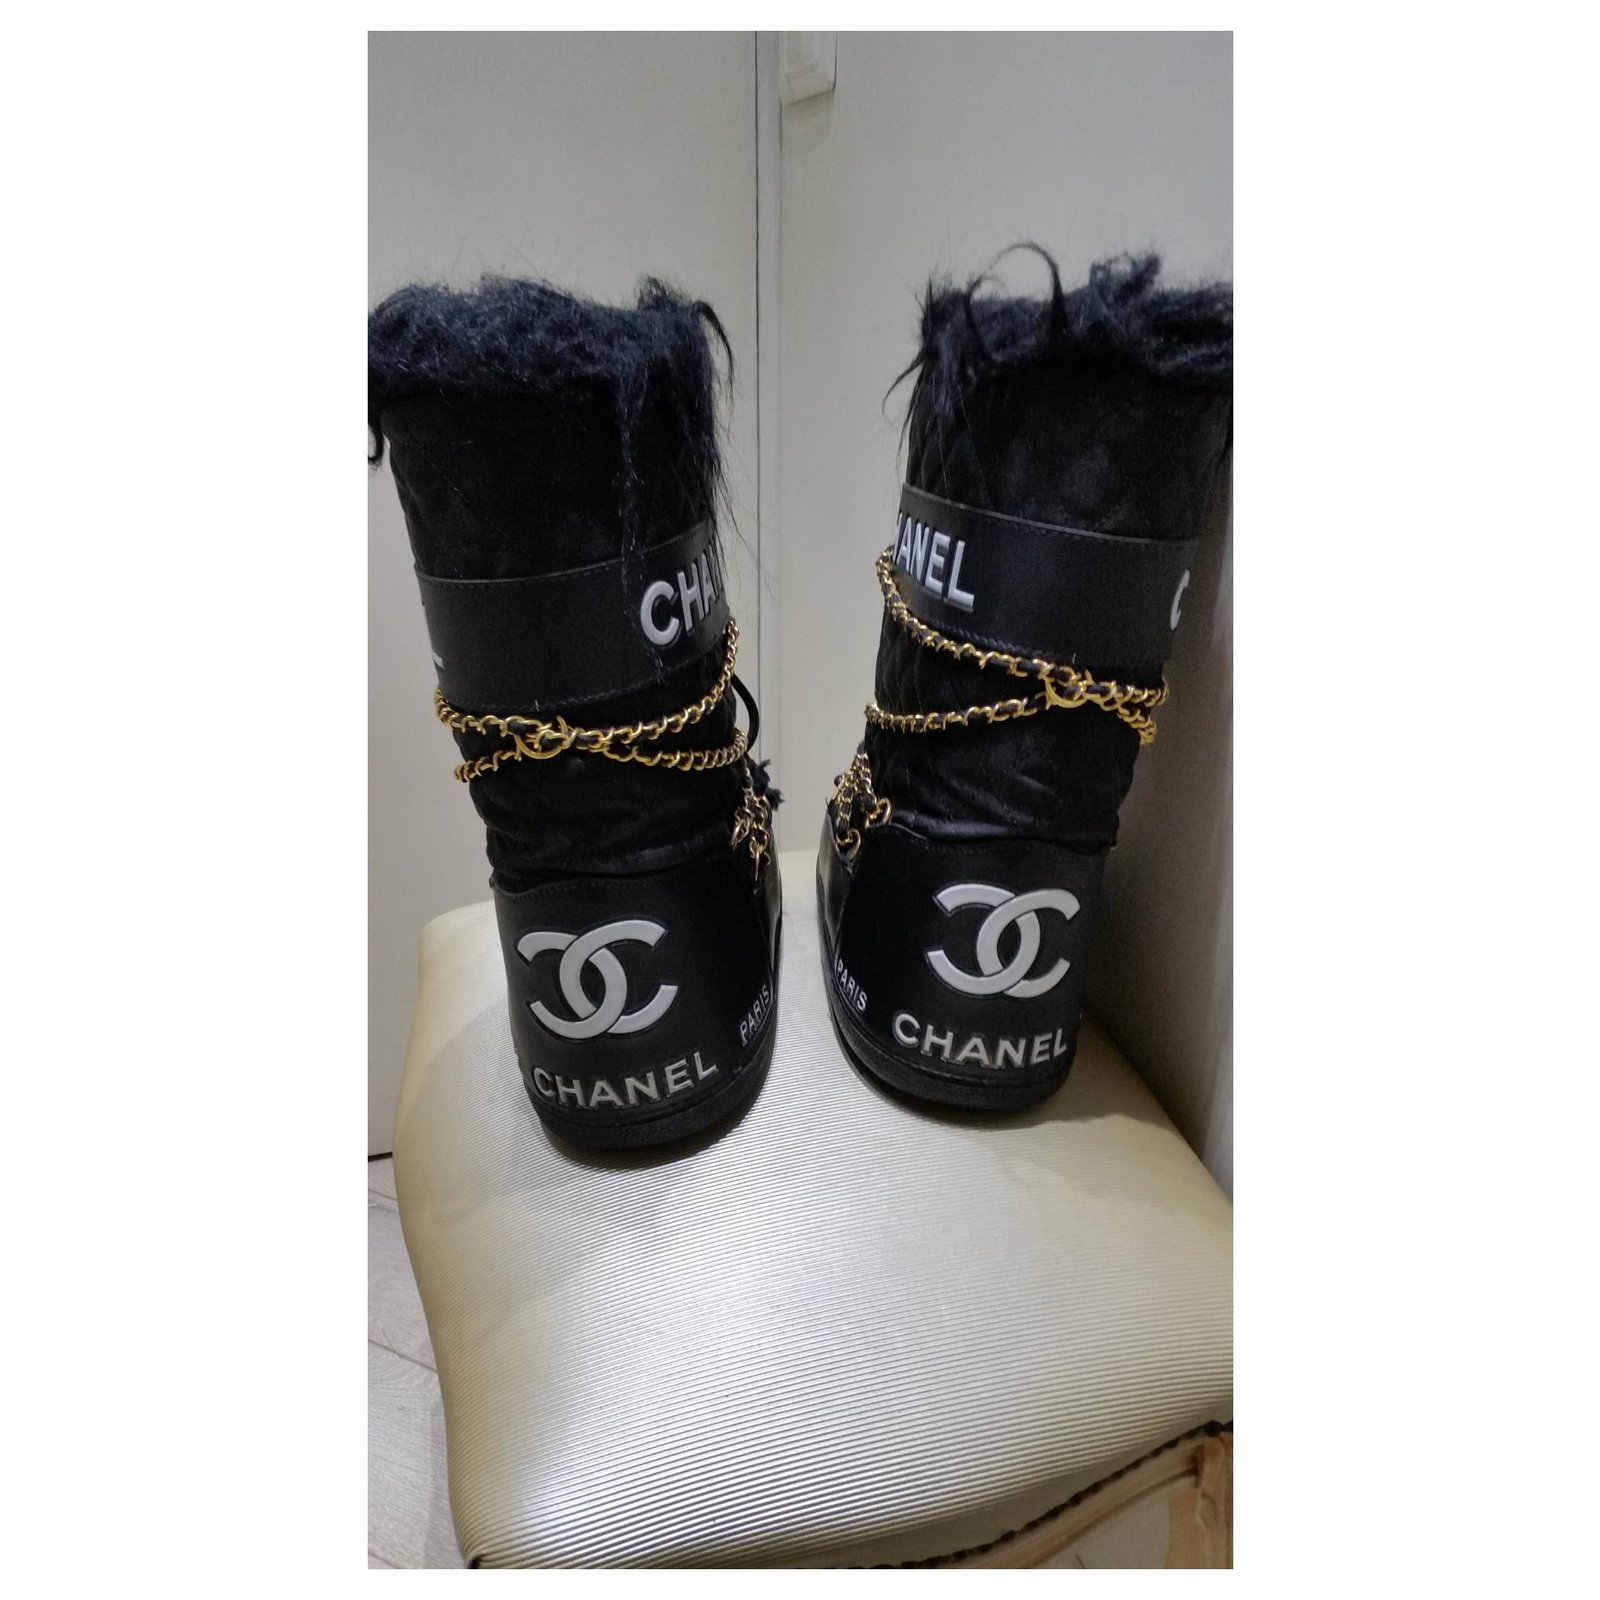 Chanel Moon Boots Sweden, SAVE 52% 